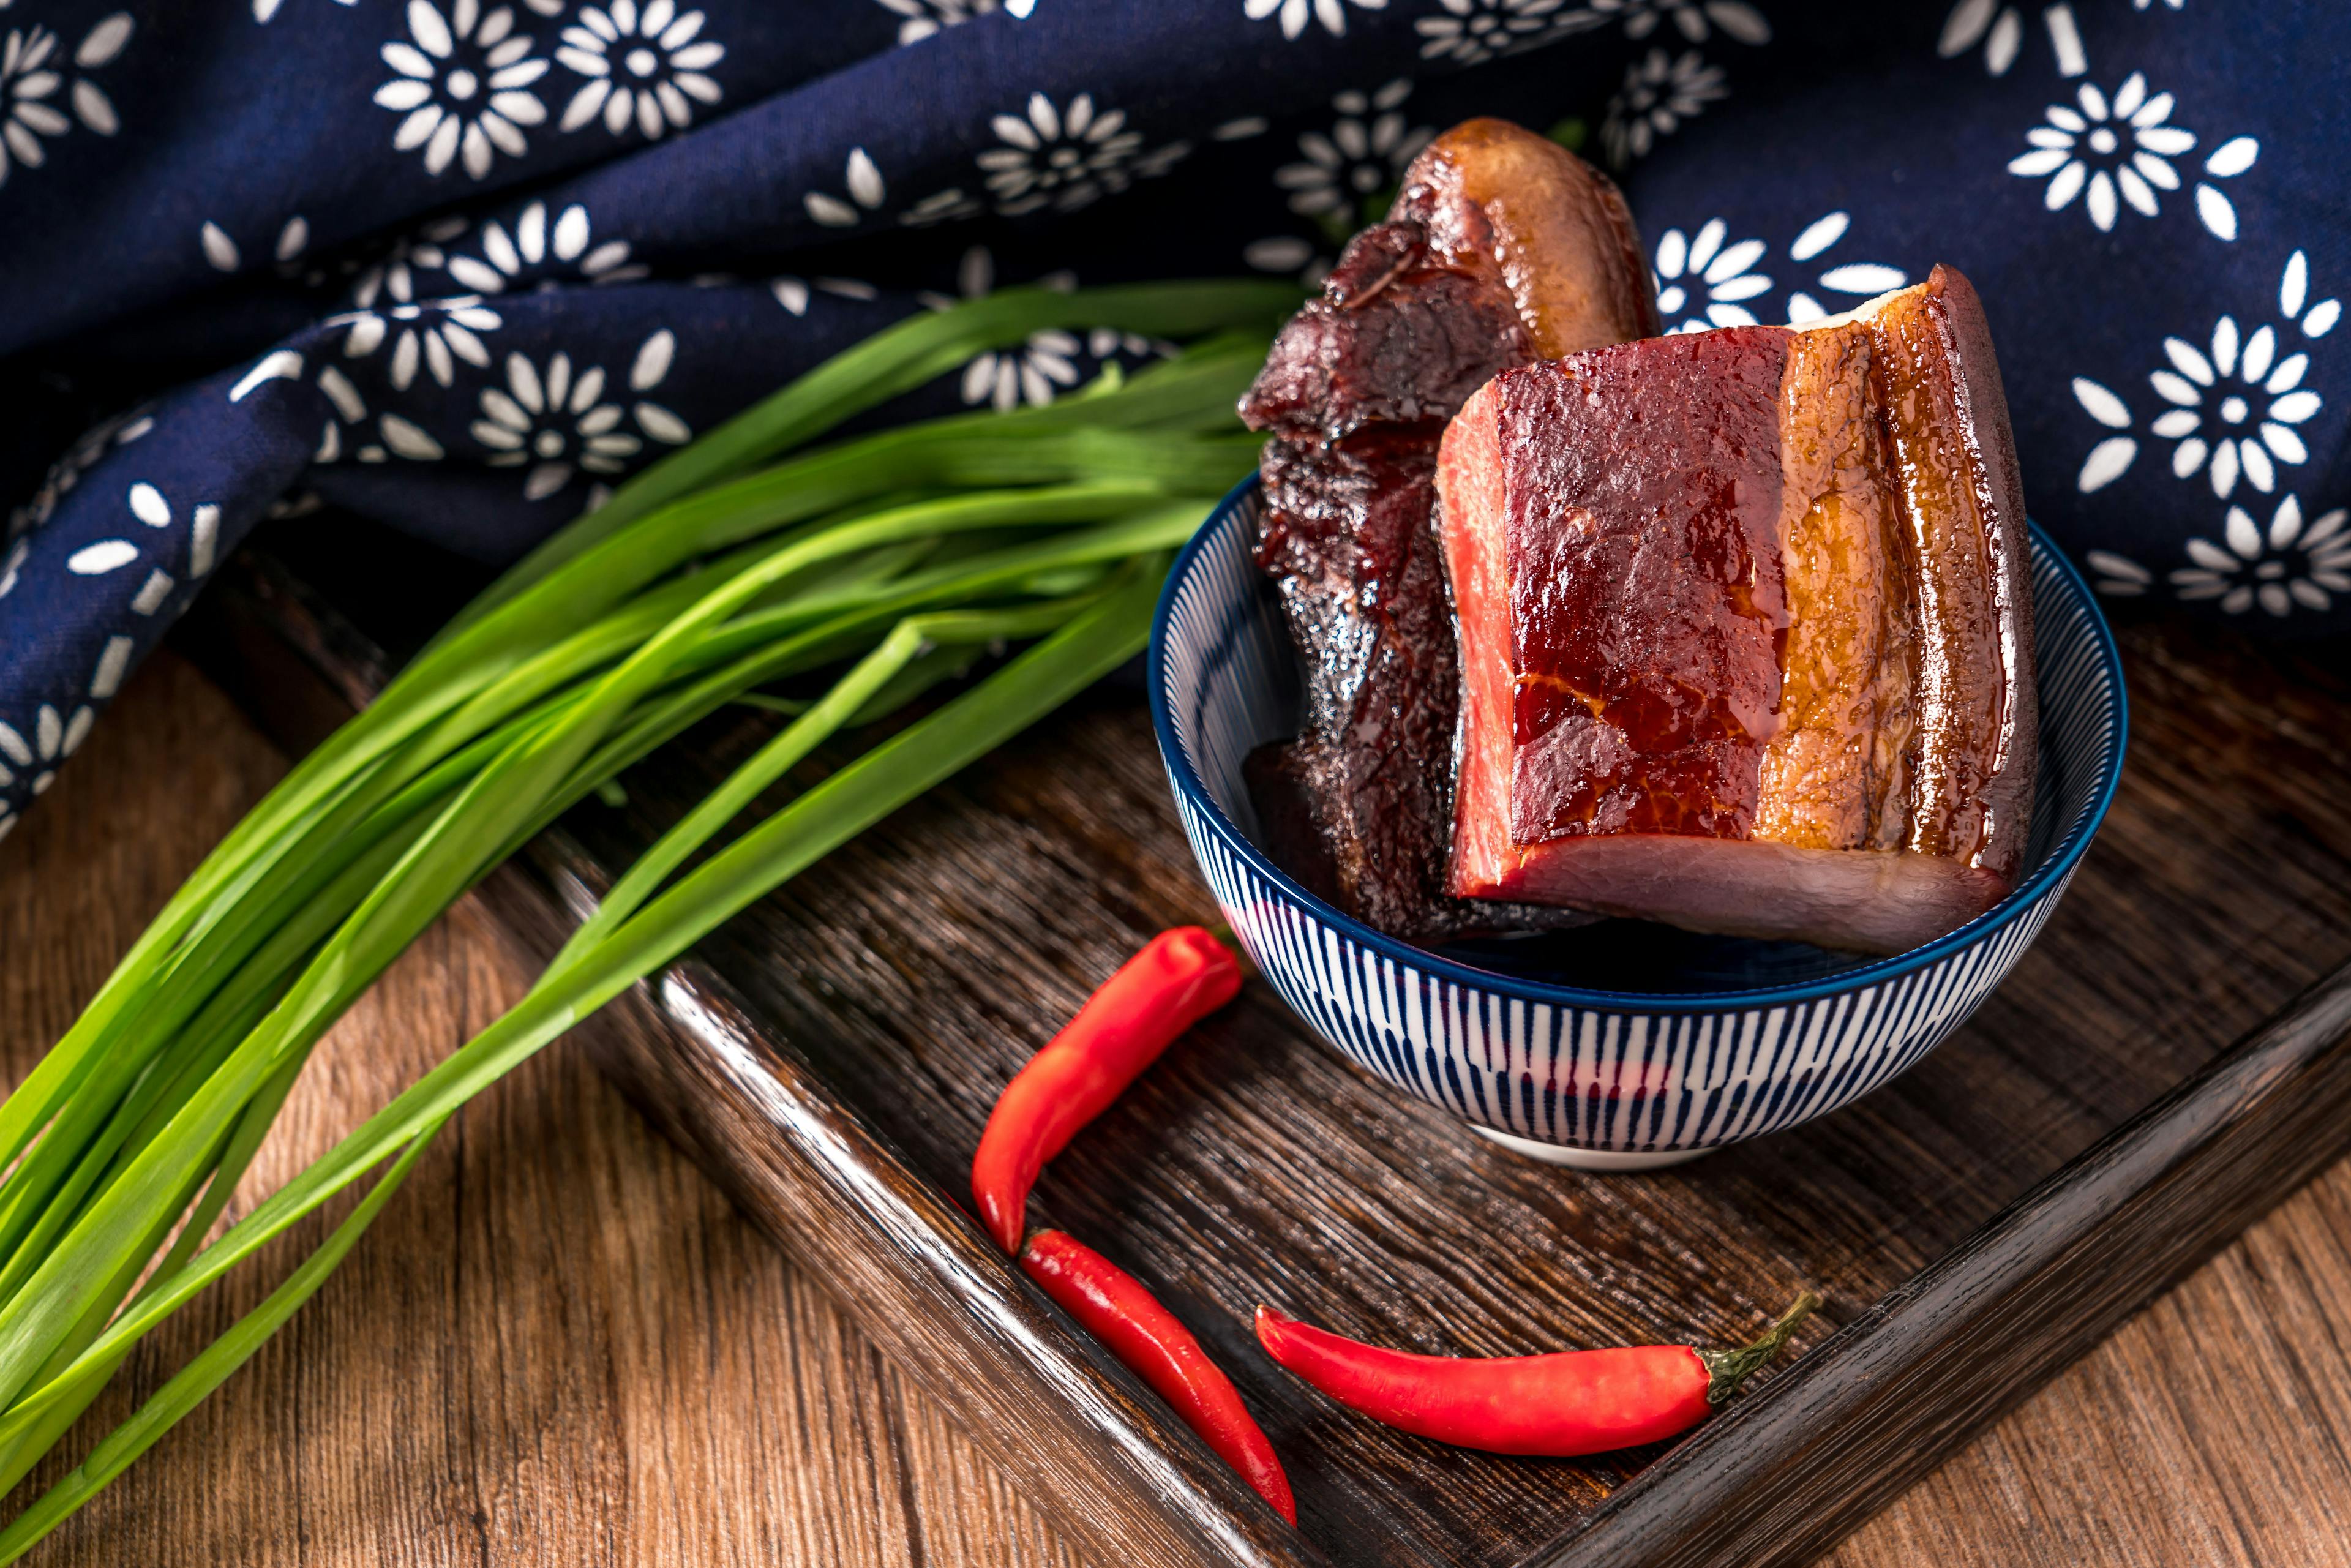 Chinese traditional cuisine bacon on wooden table | Image Credit: © Govan - stock.adobe.com